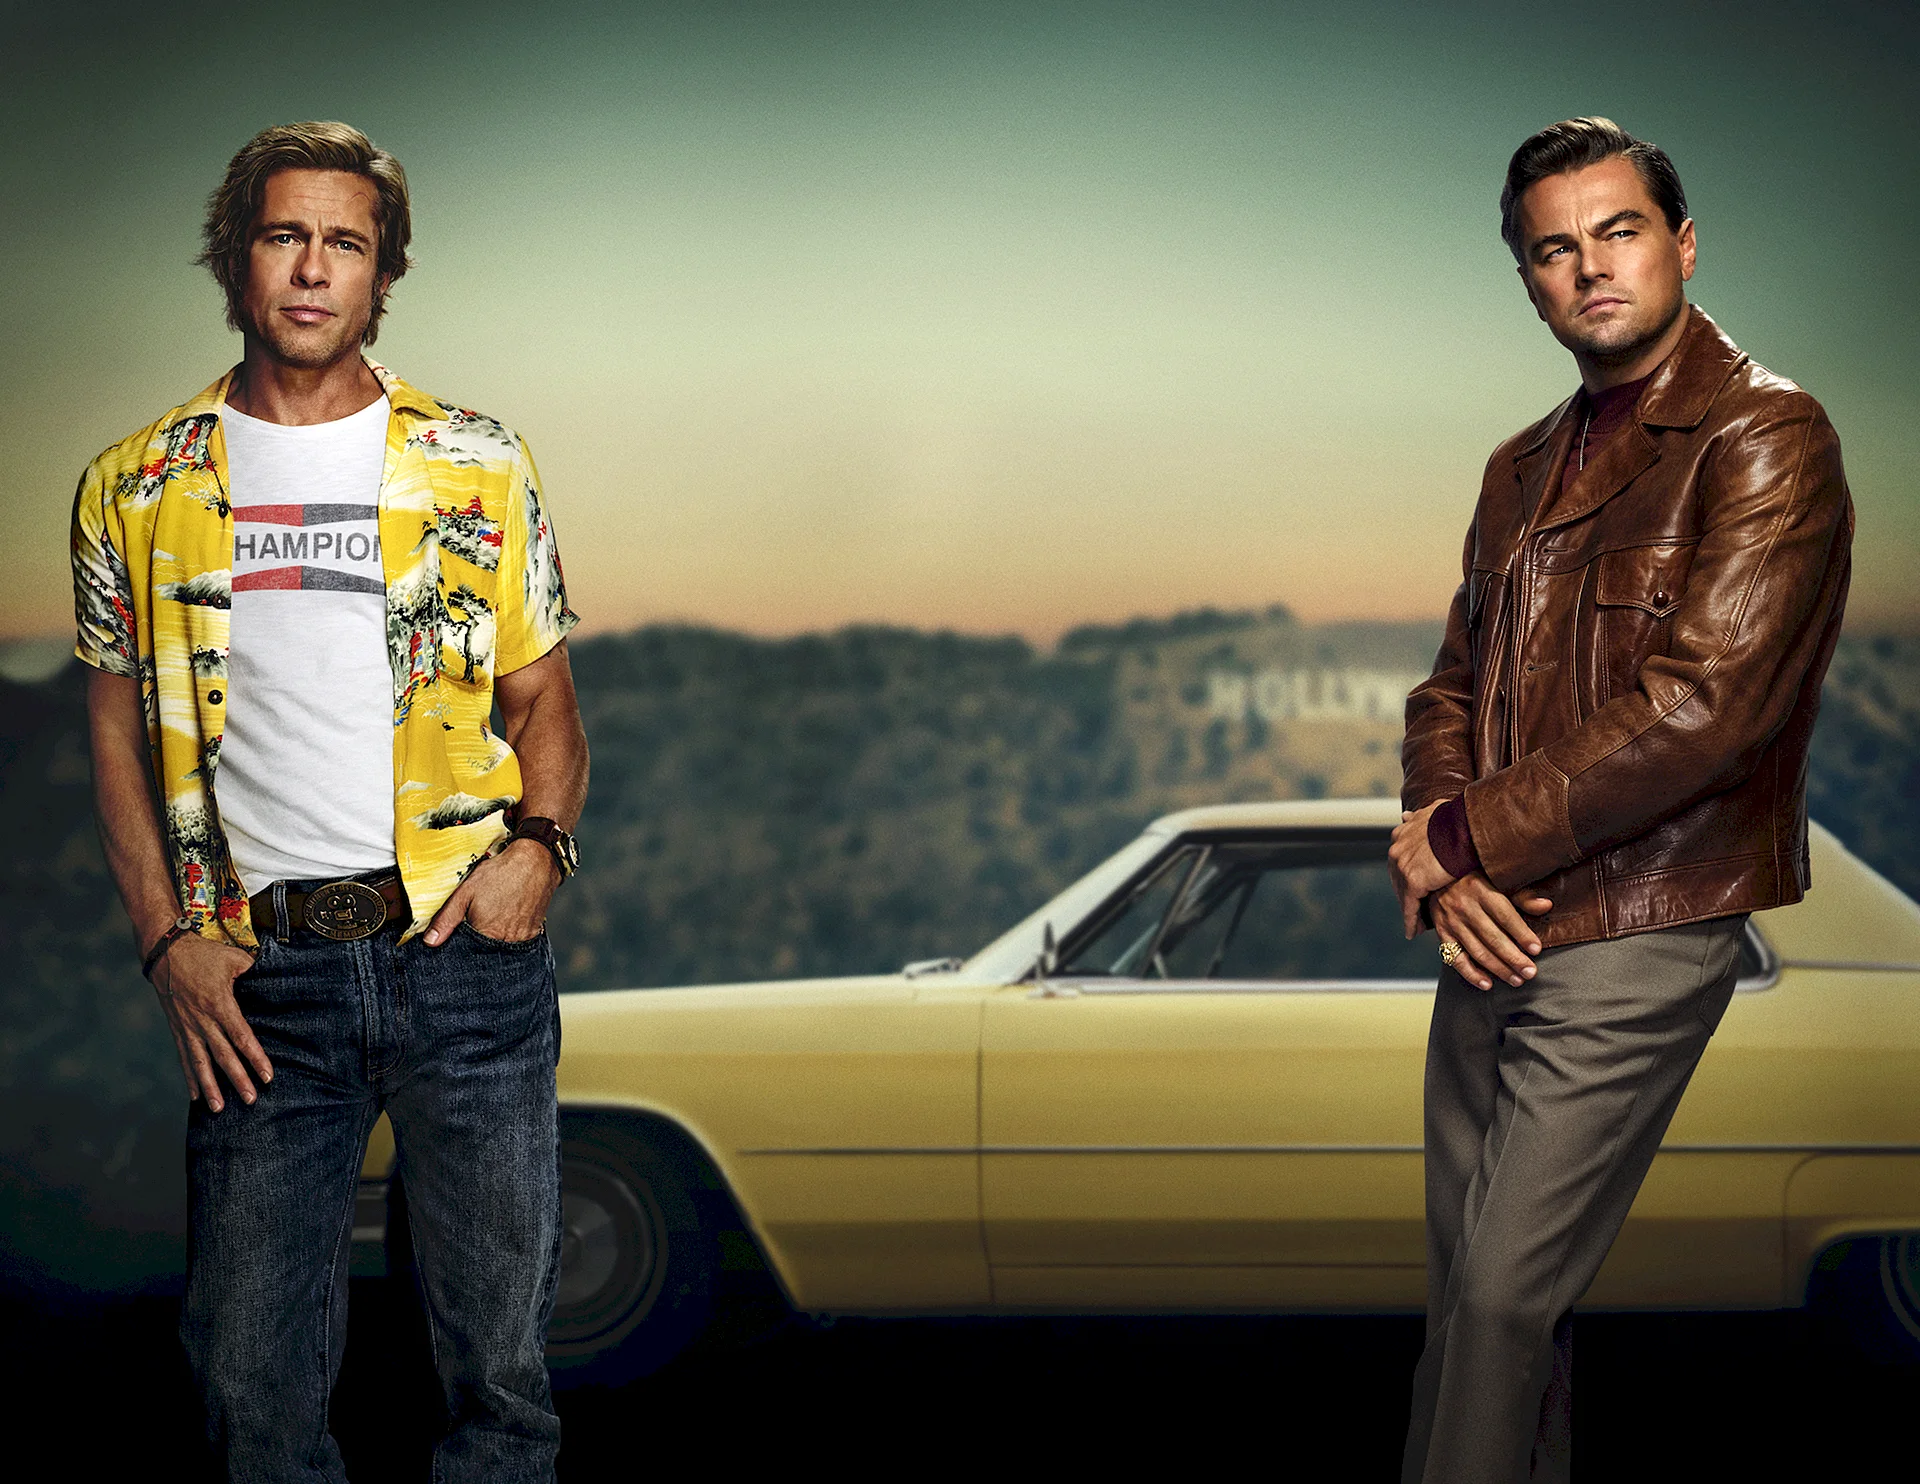 Once Upon A Time In Hollywood Poster Wallpaper